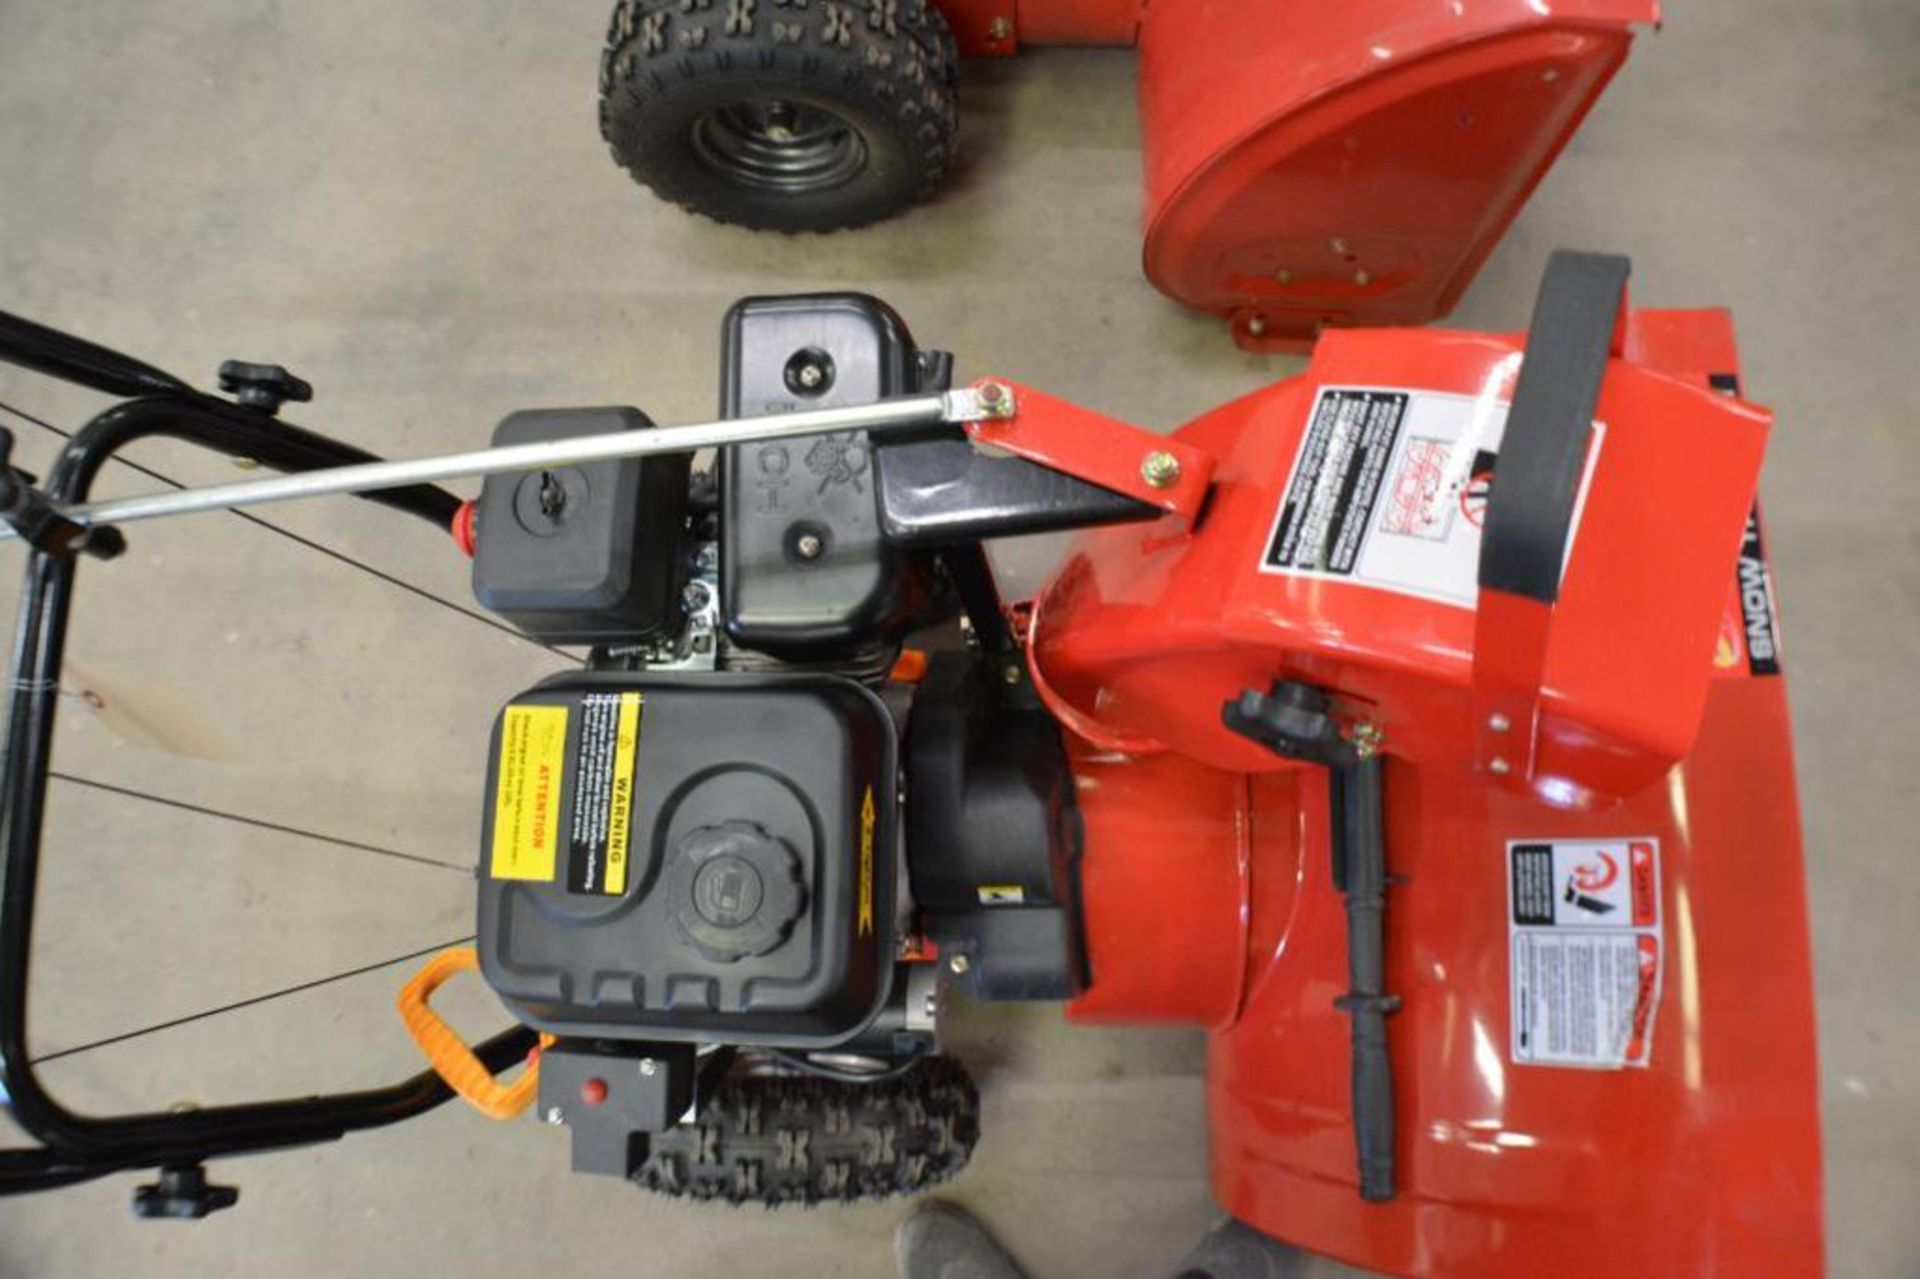 Snow Thrower 24in. 6.5HP with electric Start Engine 4 Stroke by Powerland - Image 4 of 6